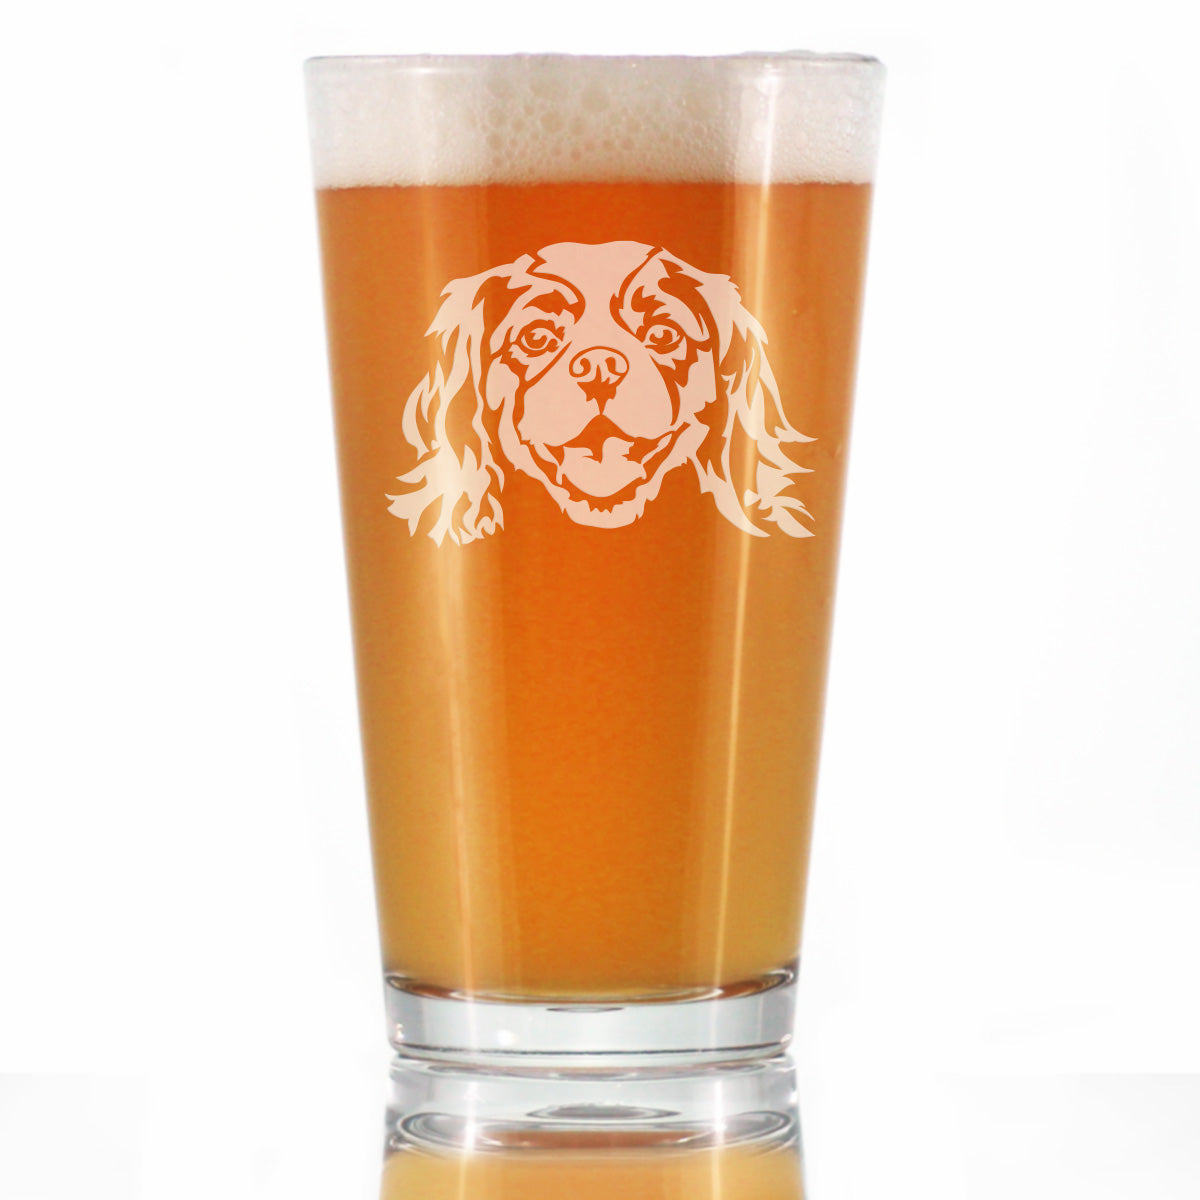 Cavalier King Charles Spaniel Face Pint Glass for Beer - Unique Dog Themed Decor and Gifts for Moms &amp; Dads of Cavaliers - 16 Oz